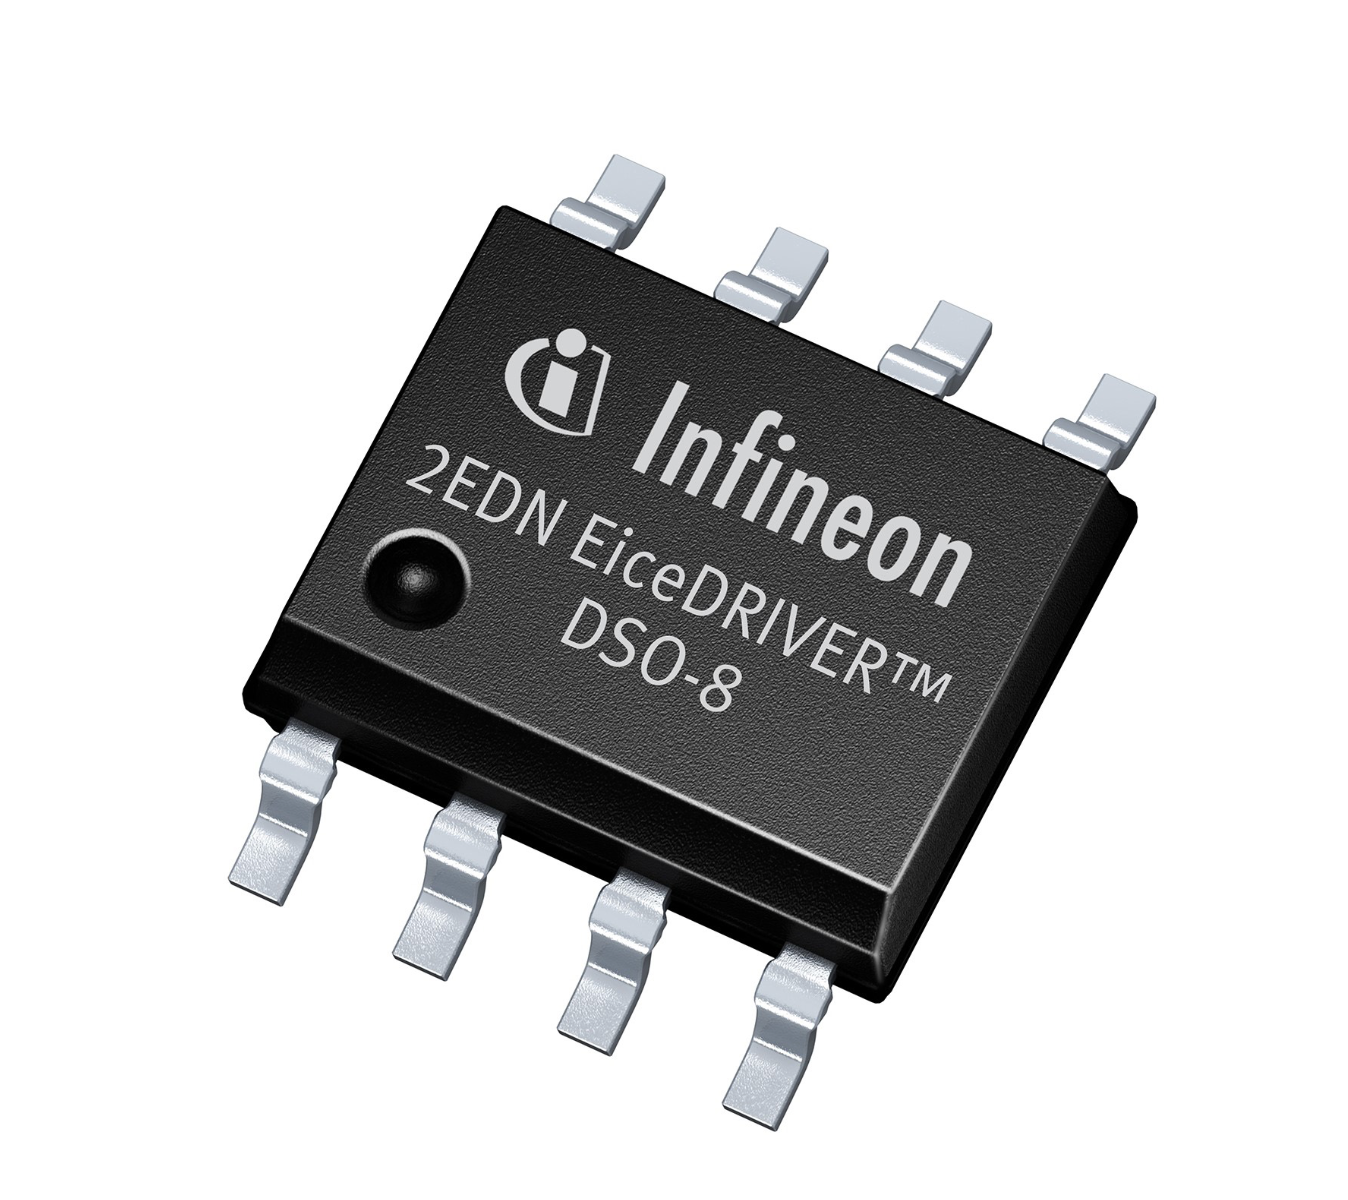 Infineon's 2EDN EiceDRIVER for MOSFETs sets new standards in robustness and power dissipation